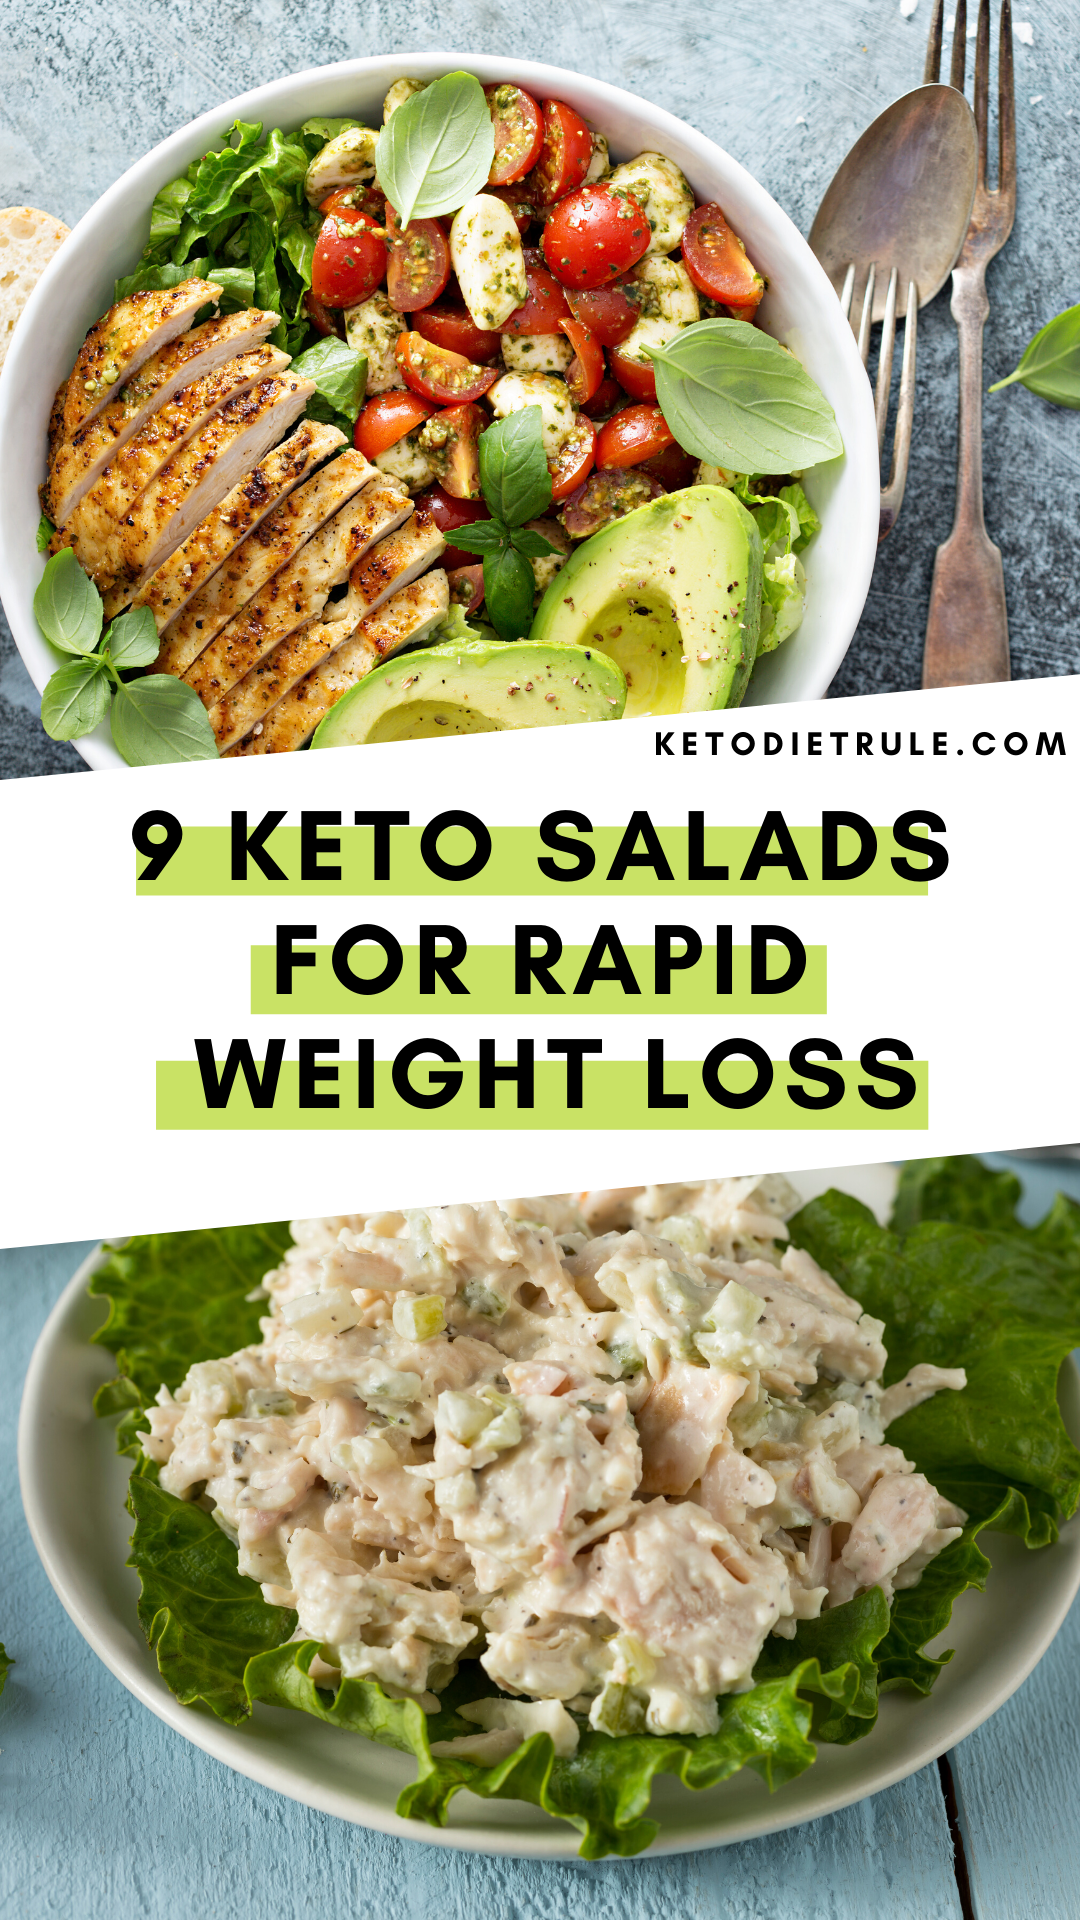 9 Best Keto Diet Salad Recipes for Rapid Weight Loss -   15 healthy recipes Low Carb eating plans ideas